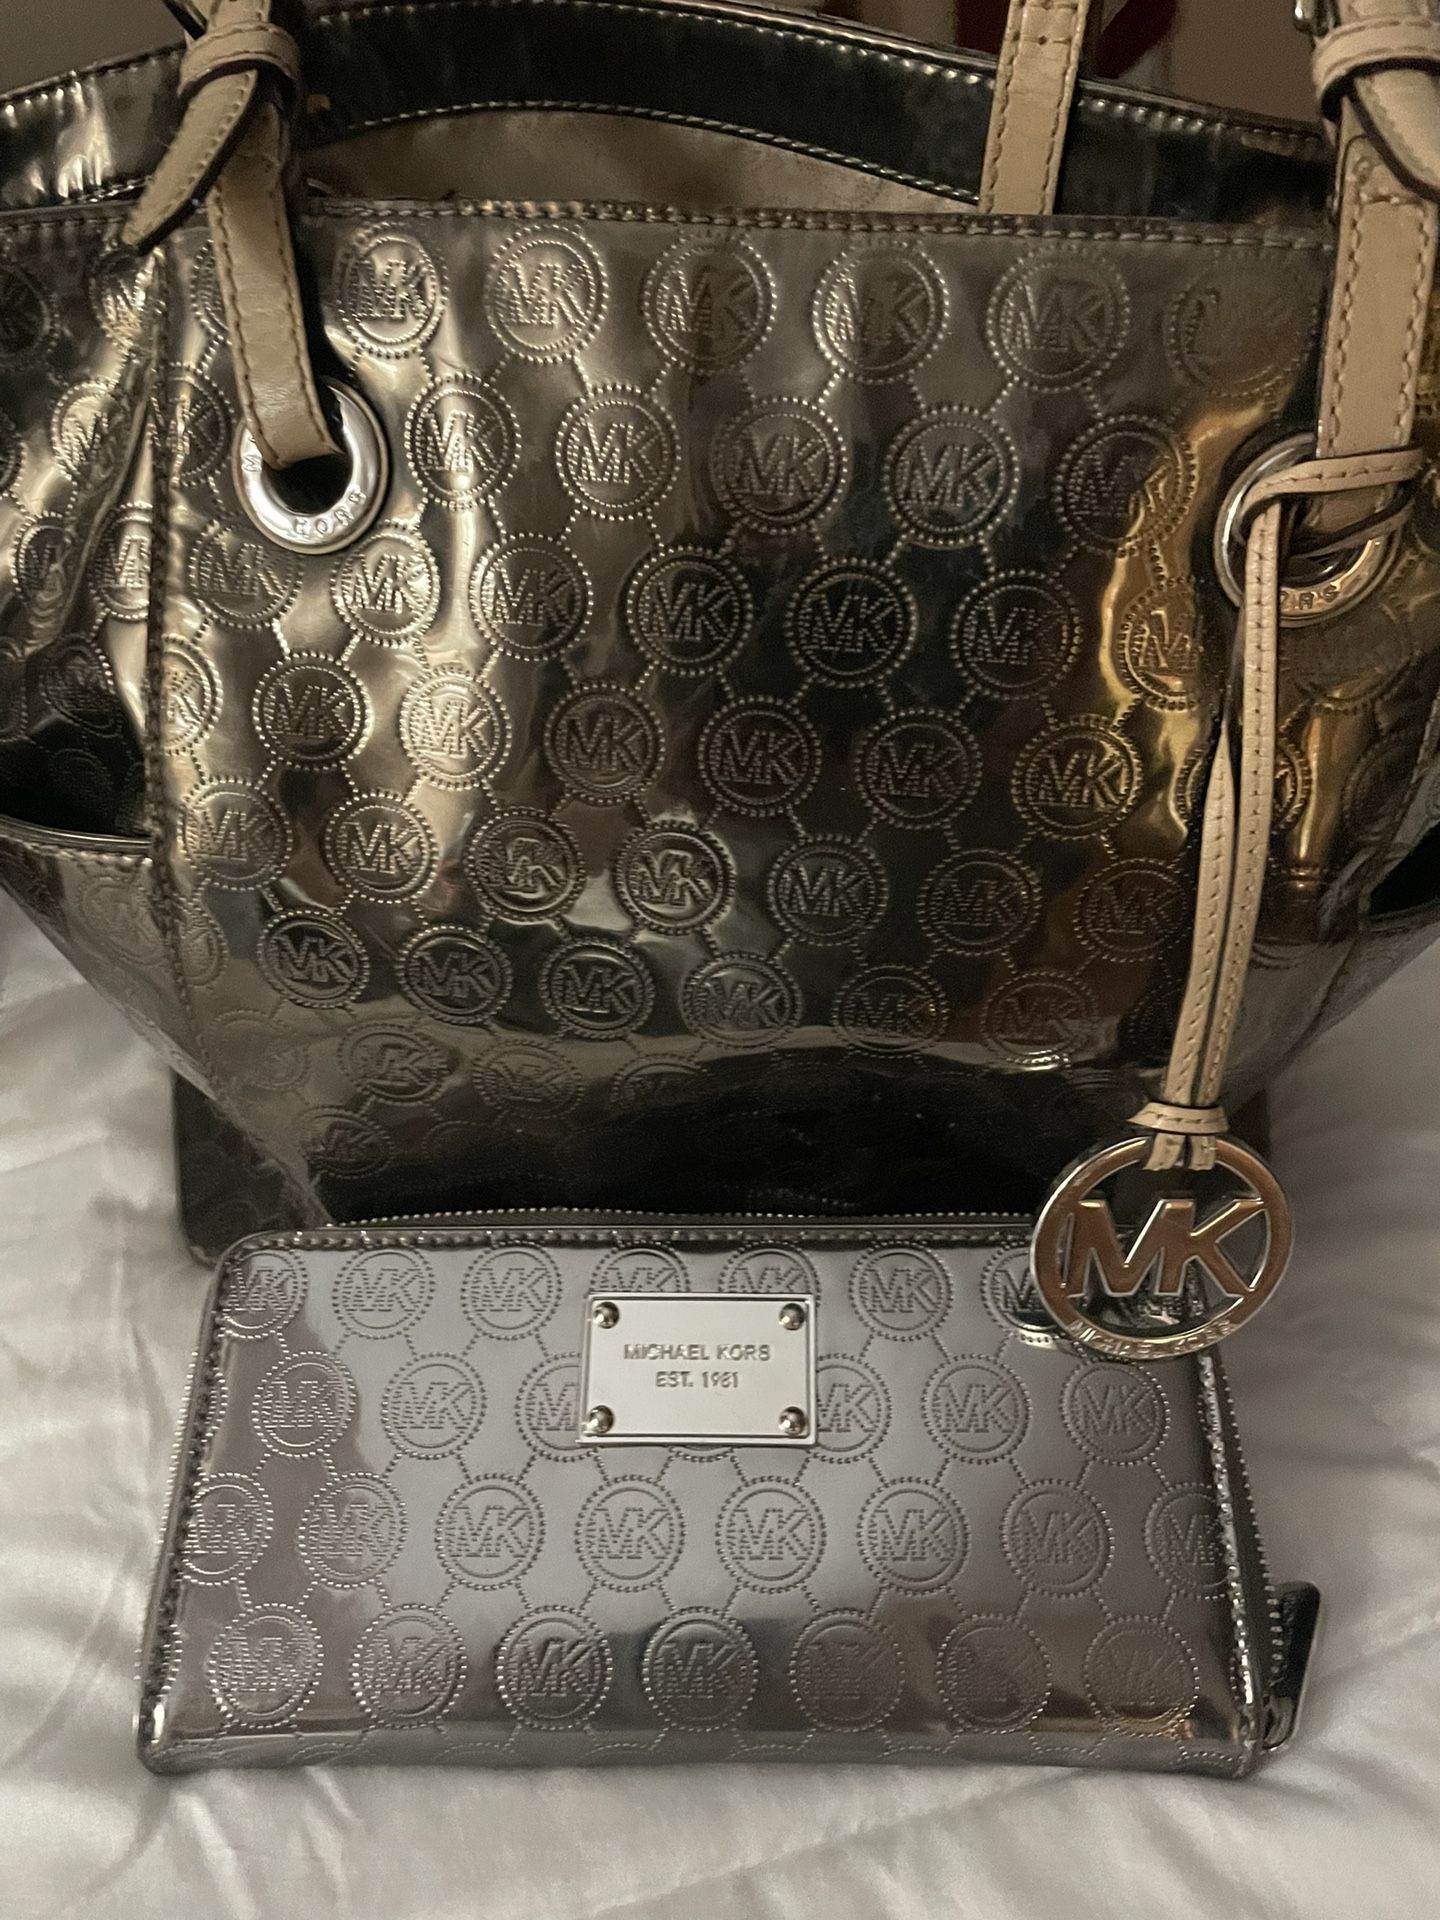 Metallic Michael Kors Bag And Wallet for Sale in Albuquerque, NM - OfferUp